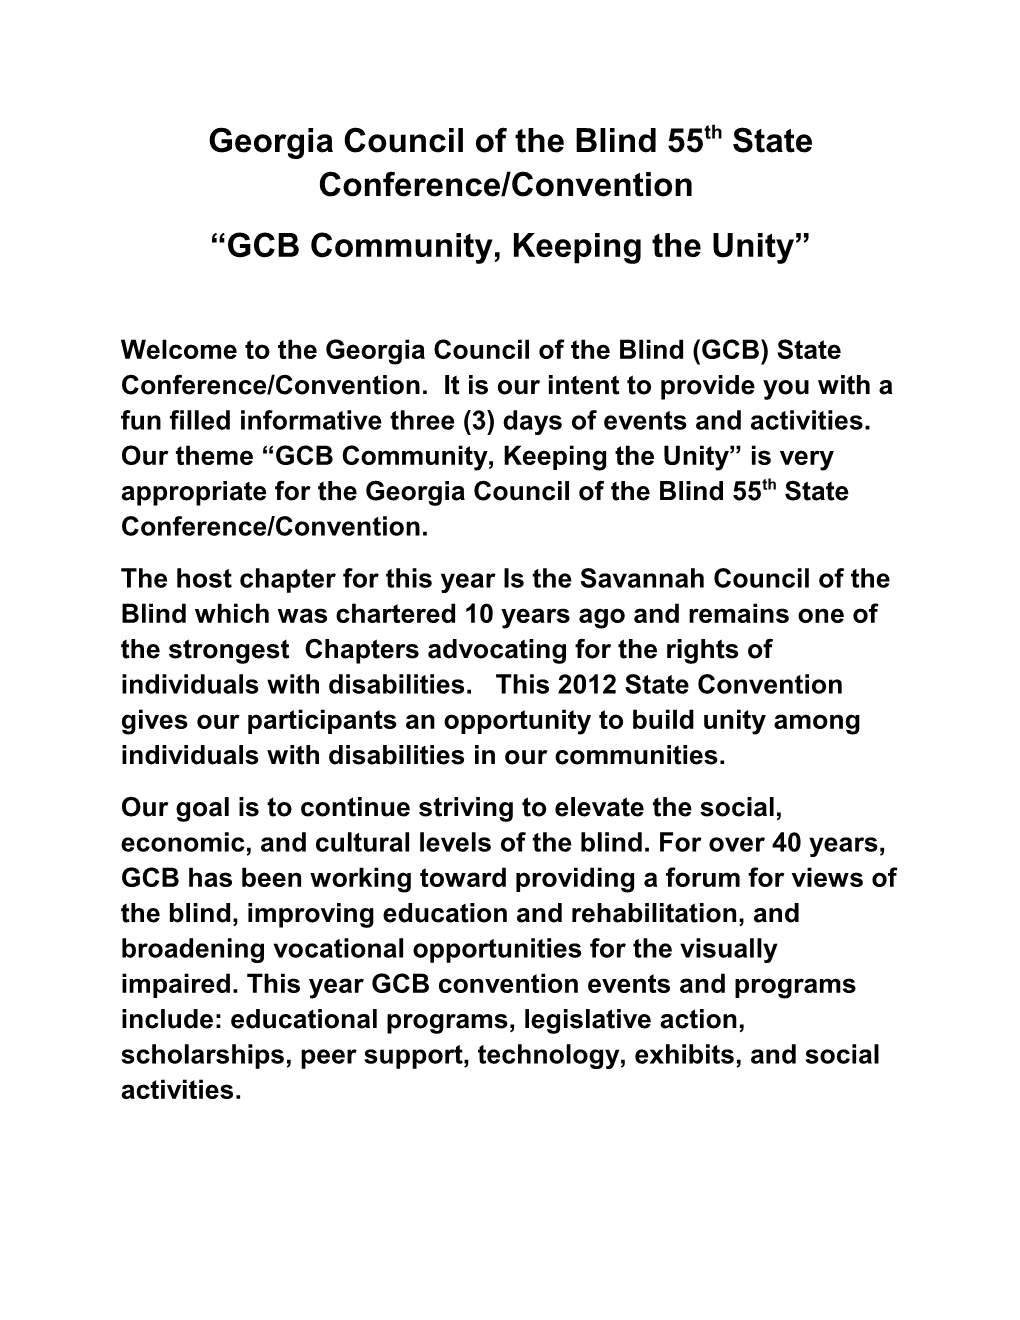 Georgia Council of the Blind 55Th State Conference/Convention